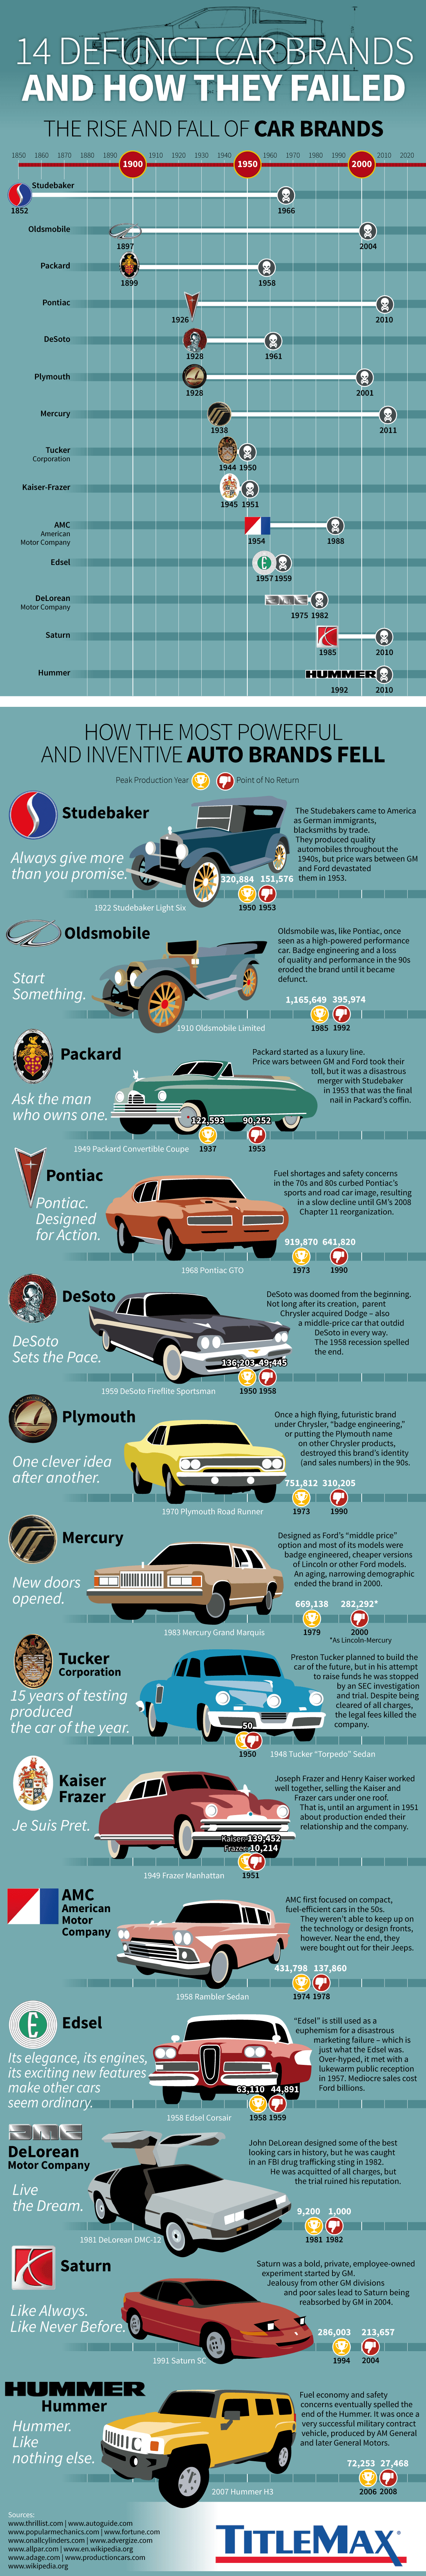 Defunct Car Logo - Infographic: 14 Defunct Car Brands, and How They Failed